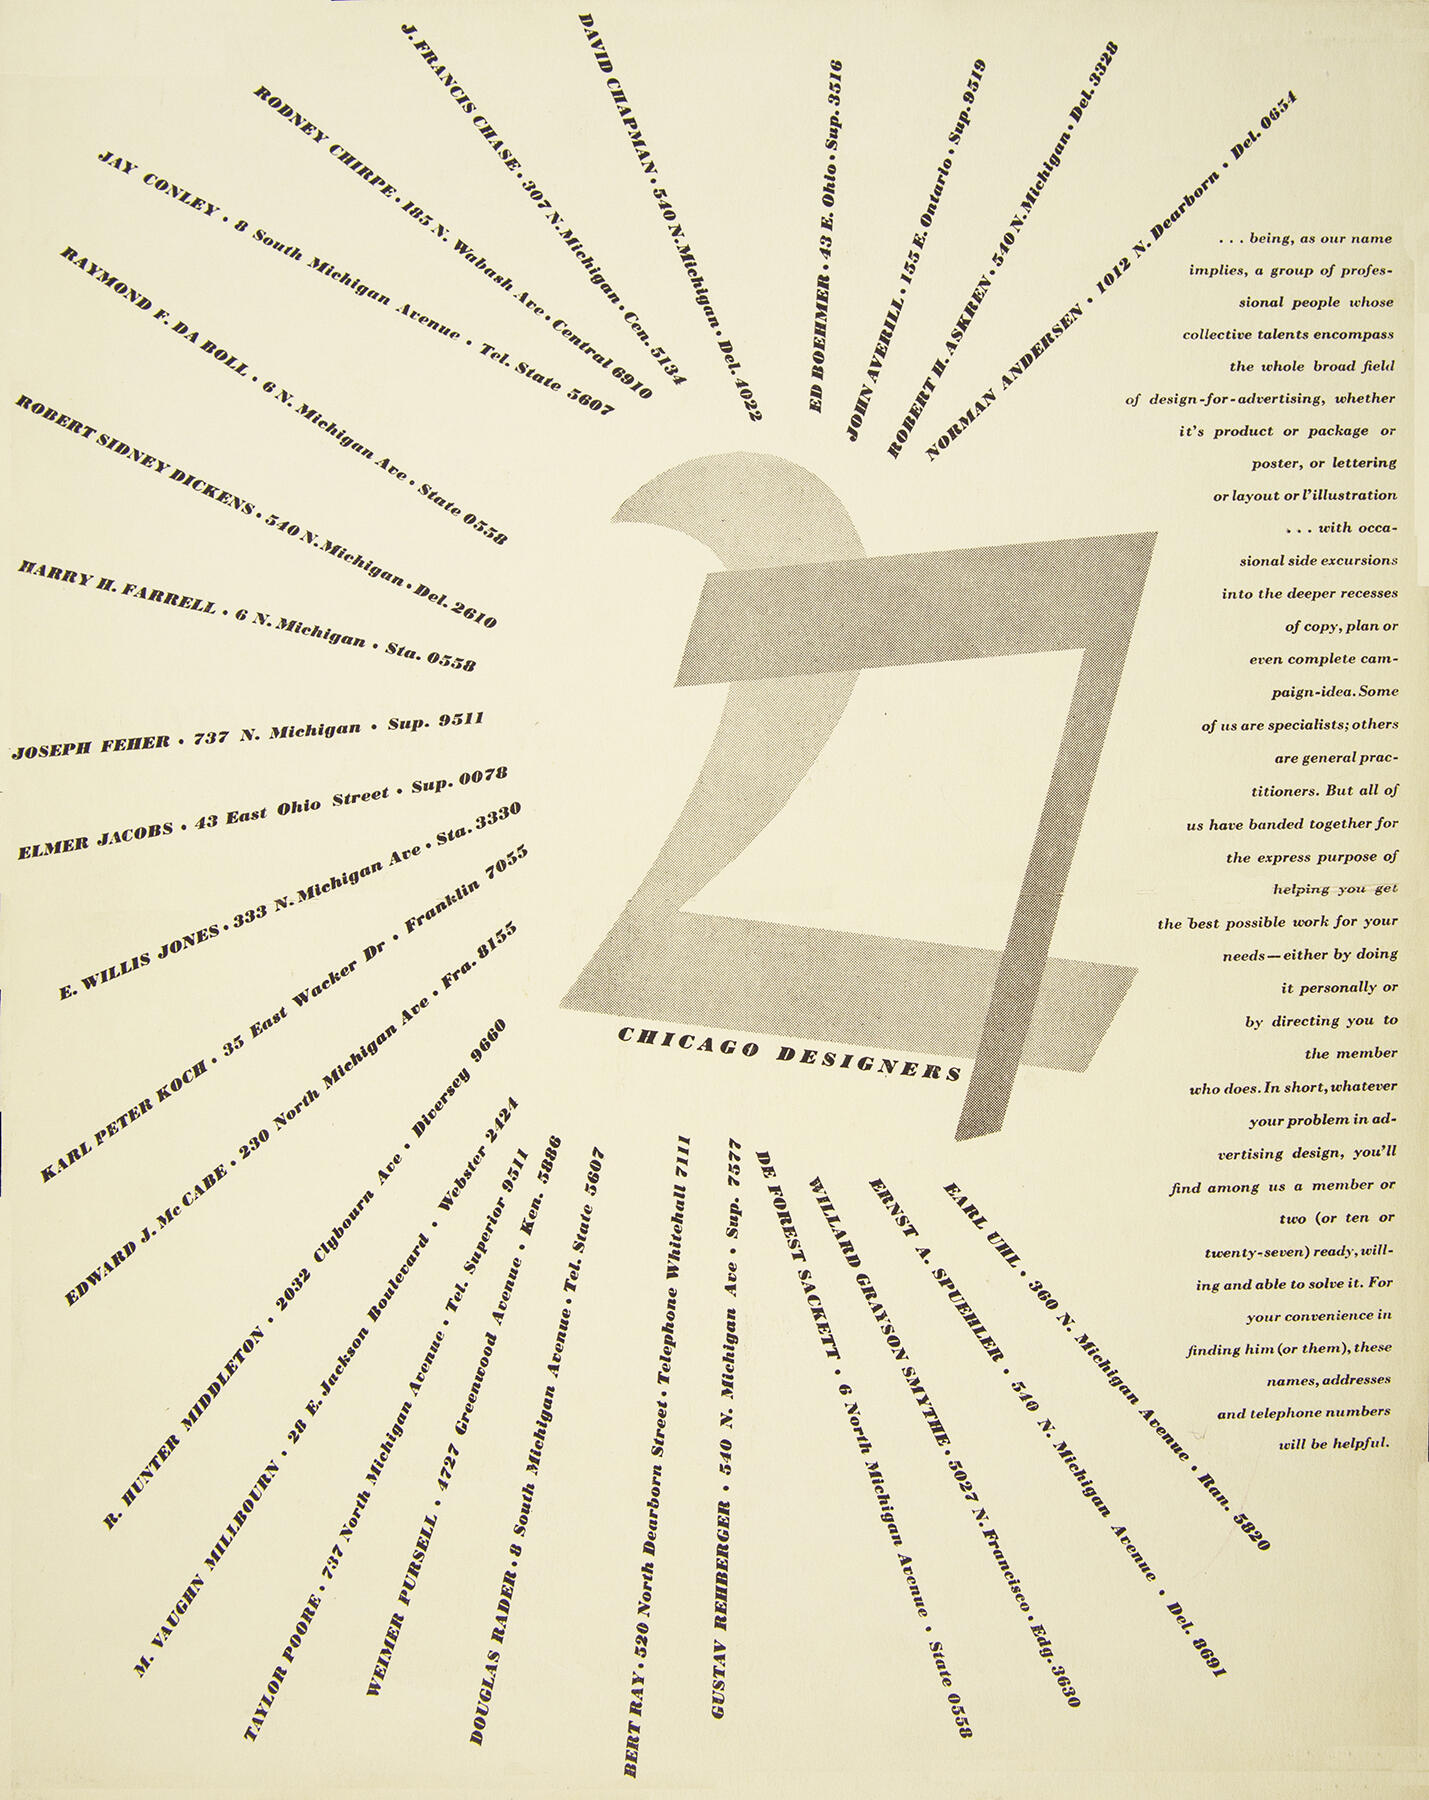 Selling Design: 27 Chicago Designers 1936–1991 - Poster by R. Hunter Middleton, circa 1940